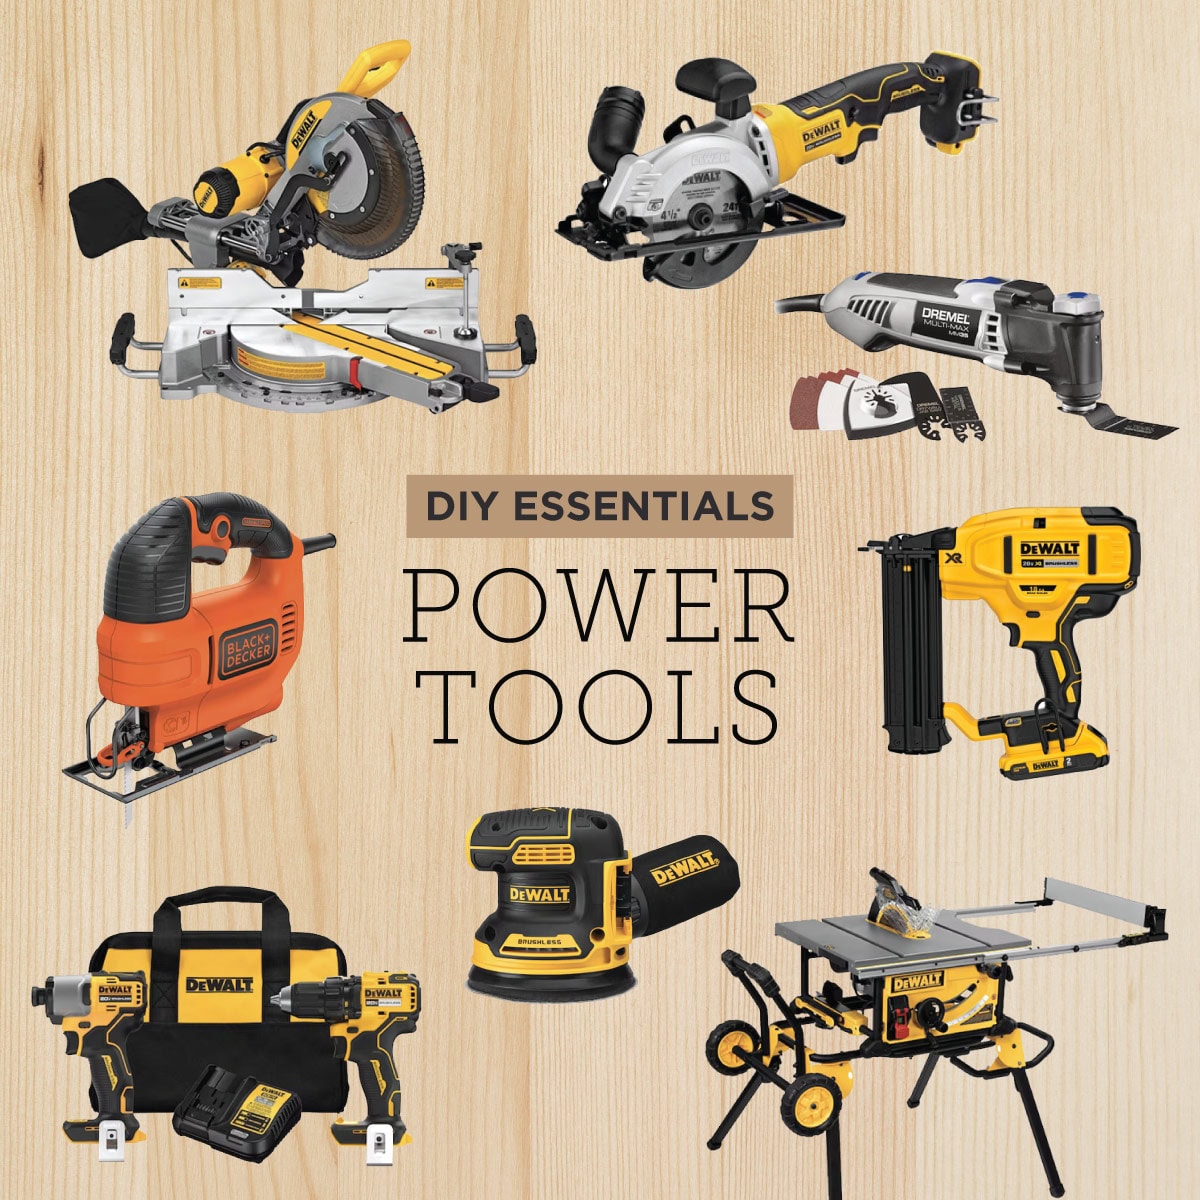 must have DIY power tools for beginners 